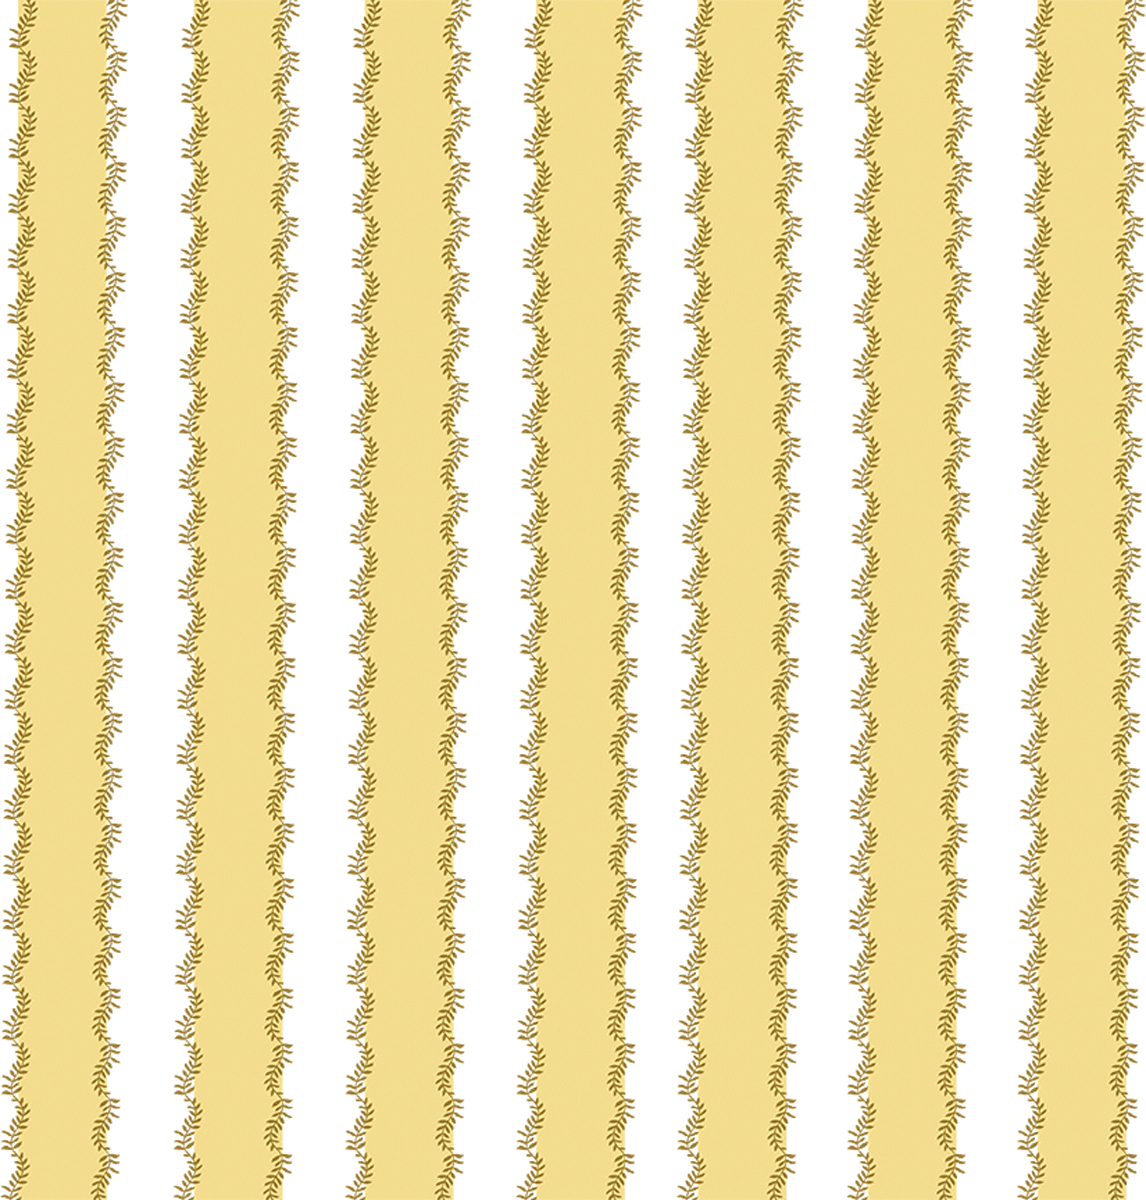 a yellow and white striped background.